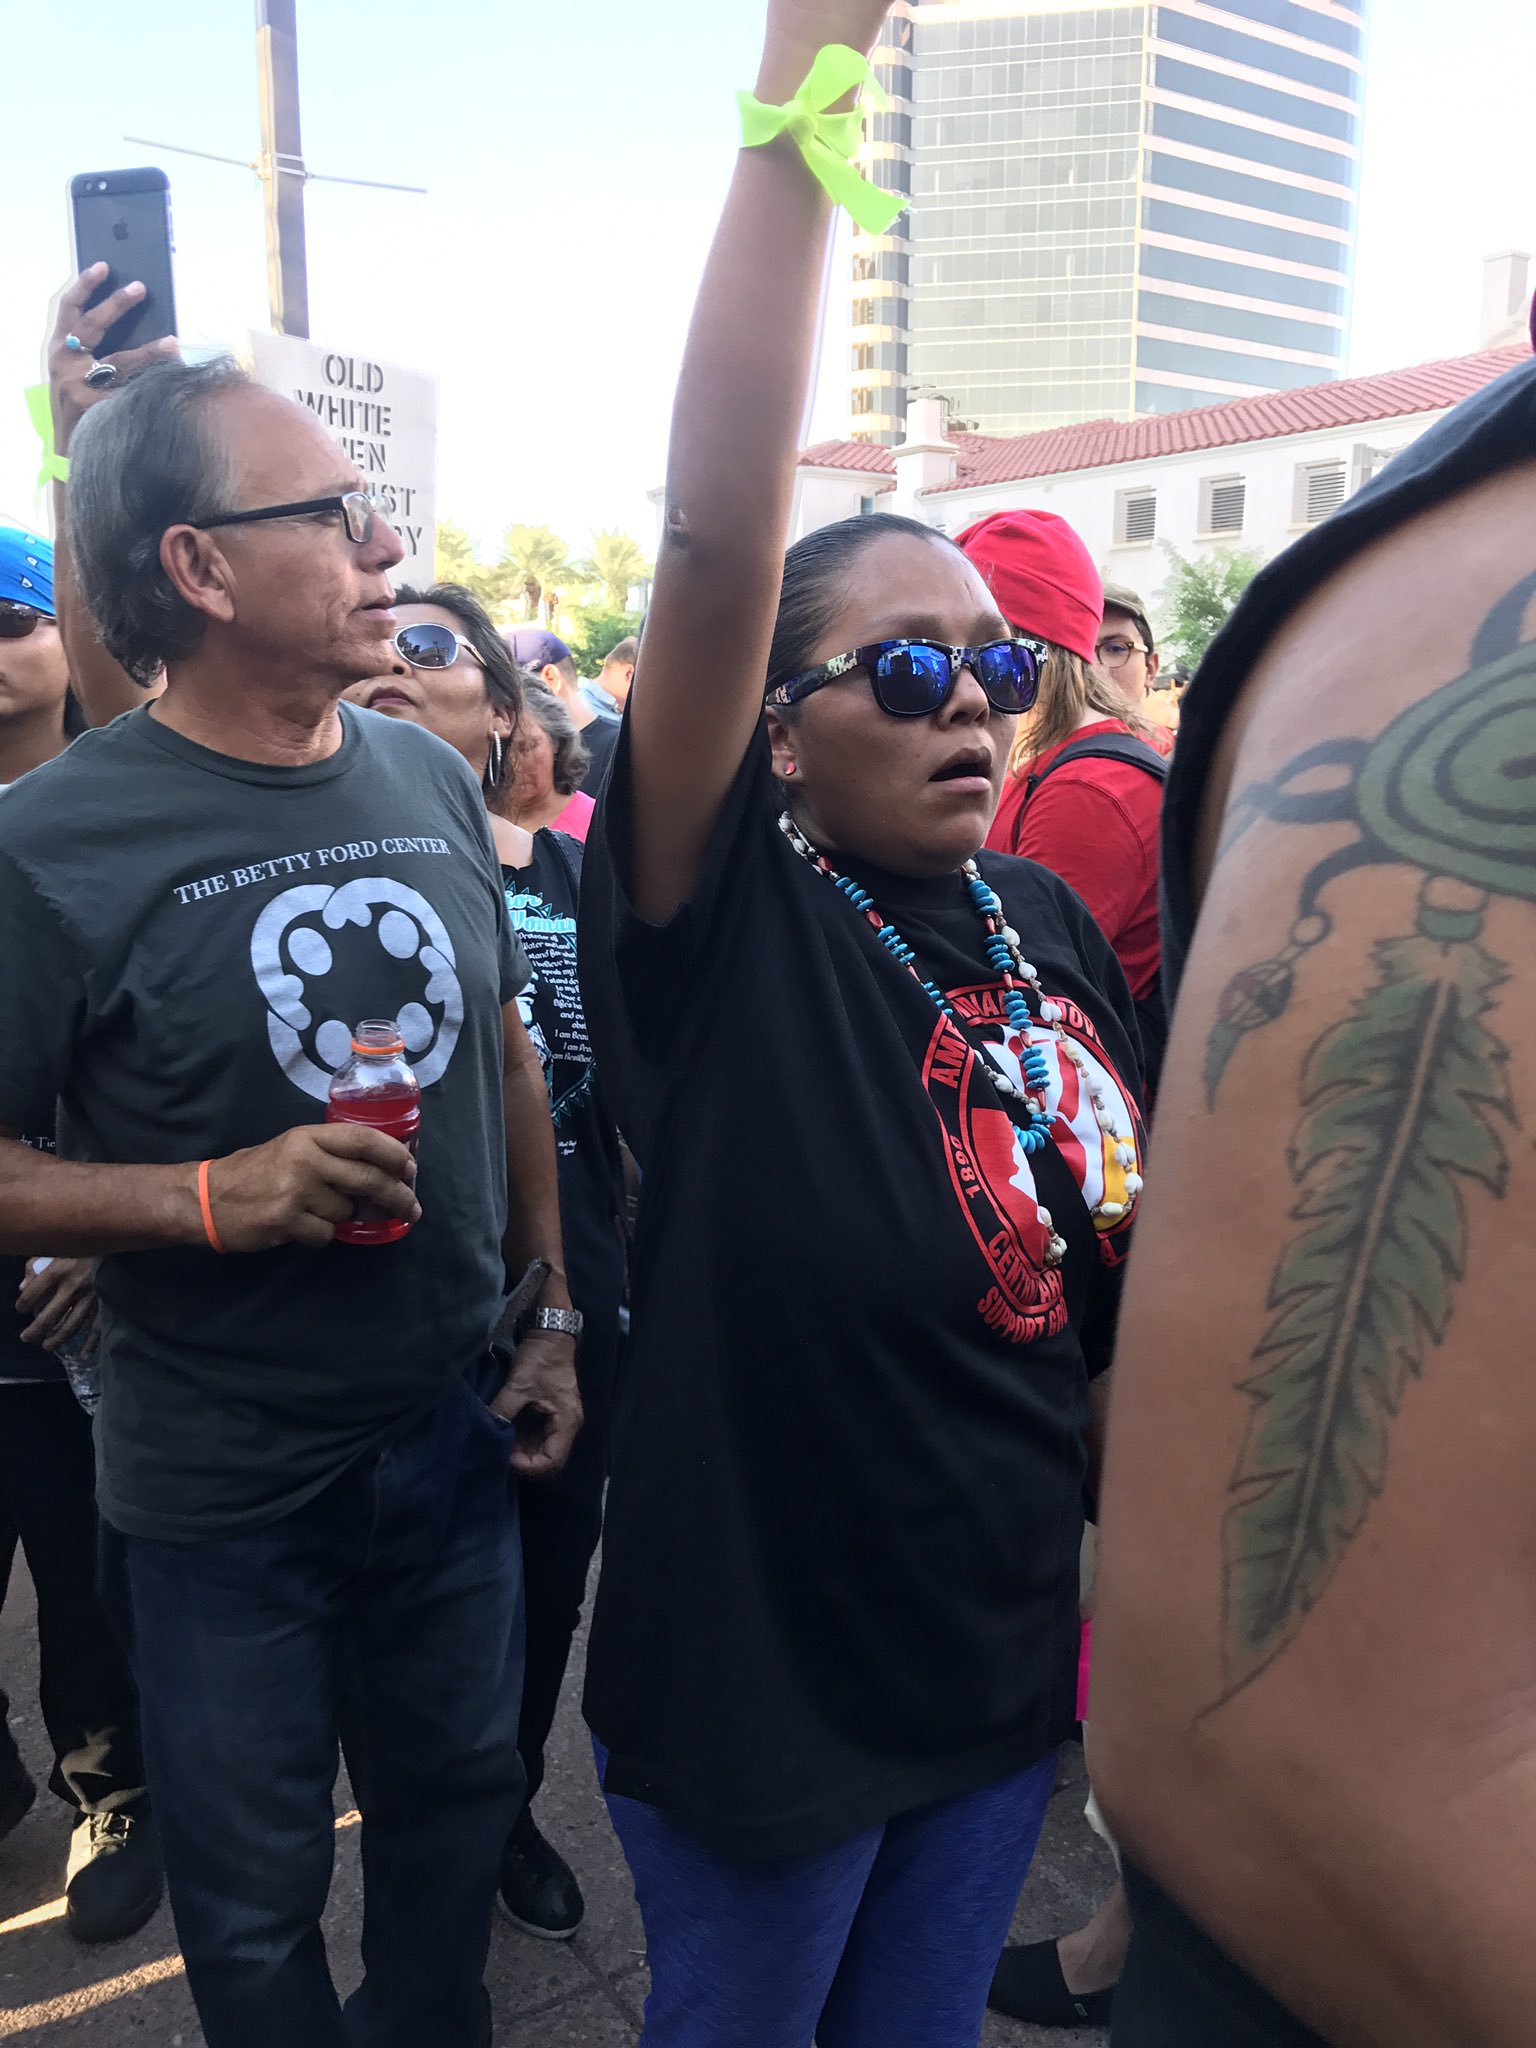 Mekahlo Medina on Twitter: "Native American tribe members march through